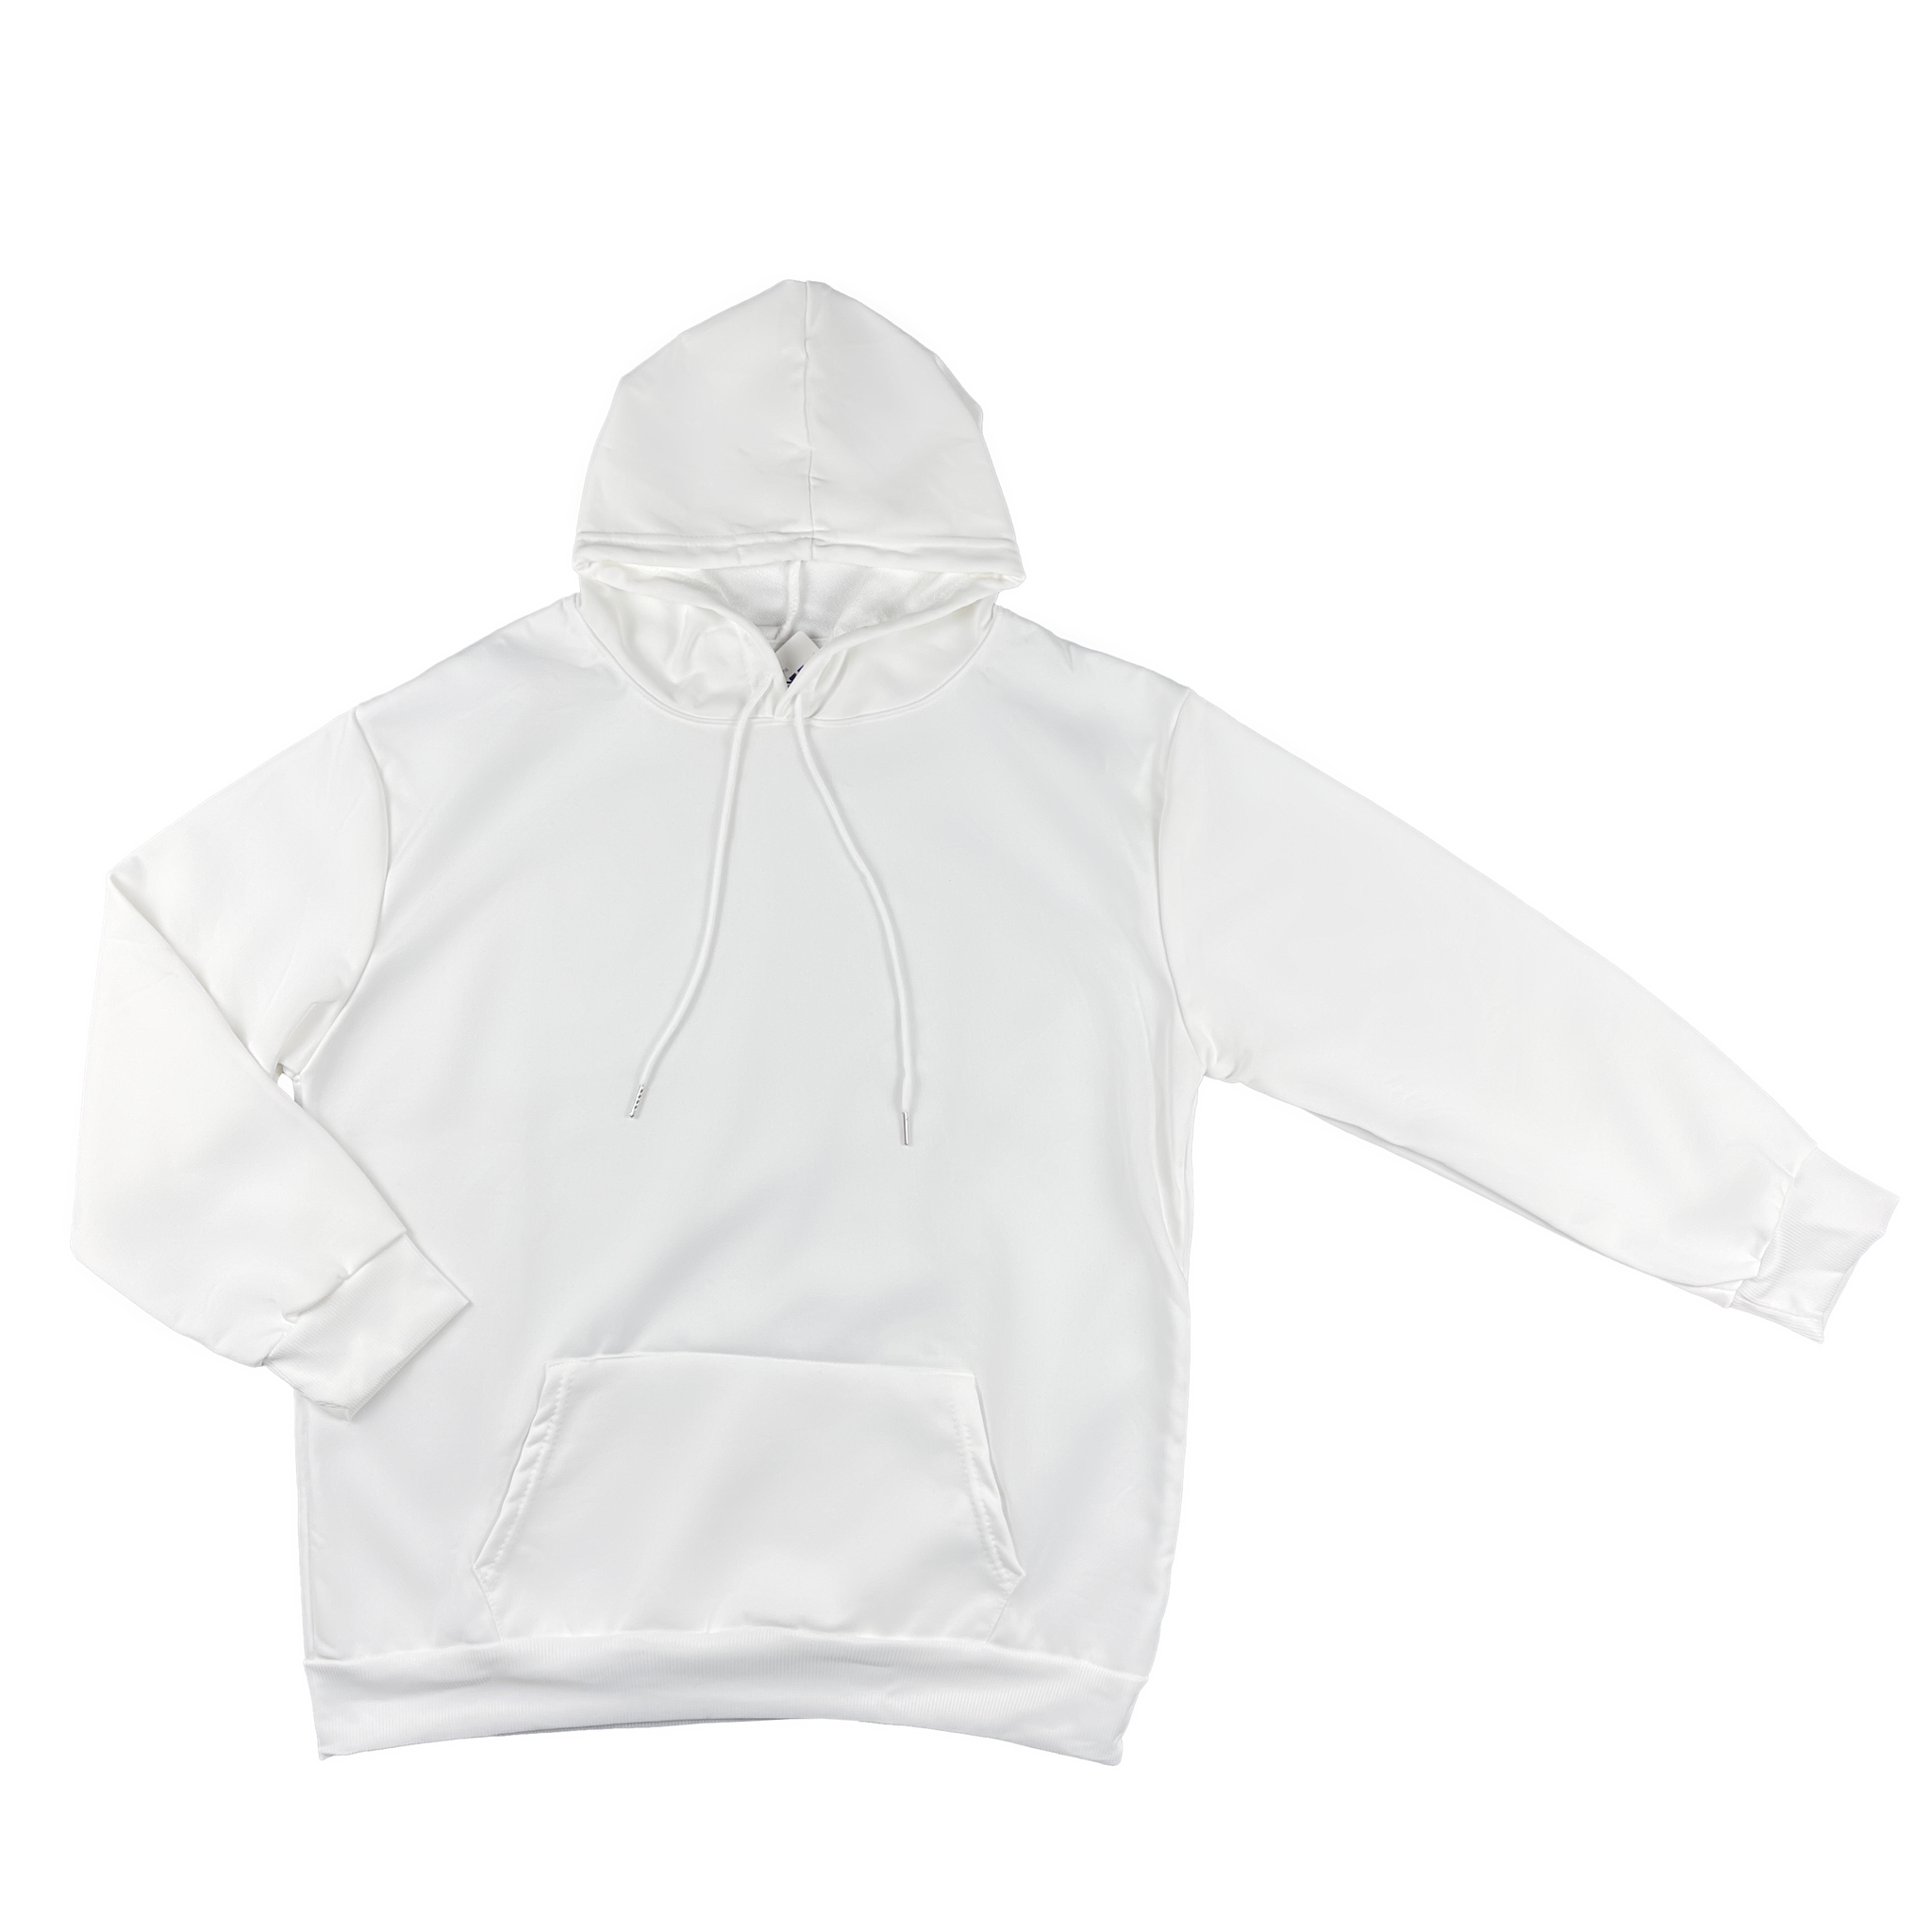 SUBLIMATABLE HOODIES – The Stainless Depot